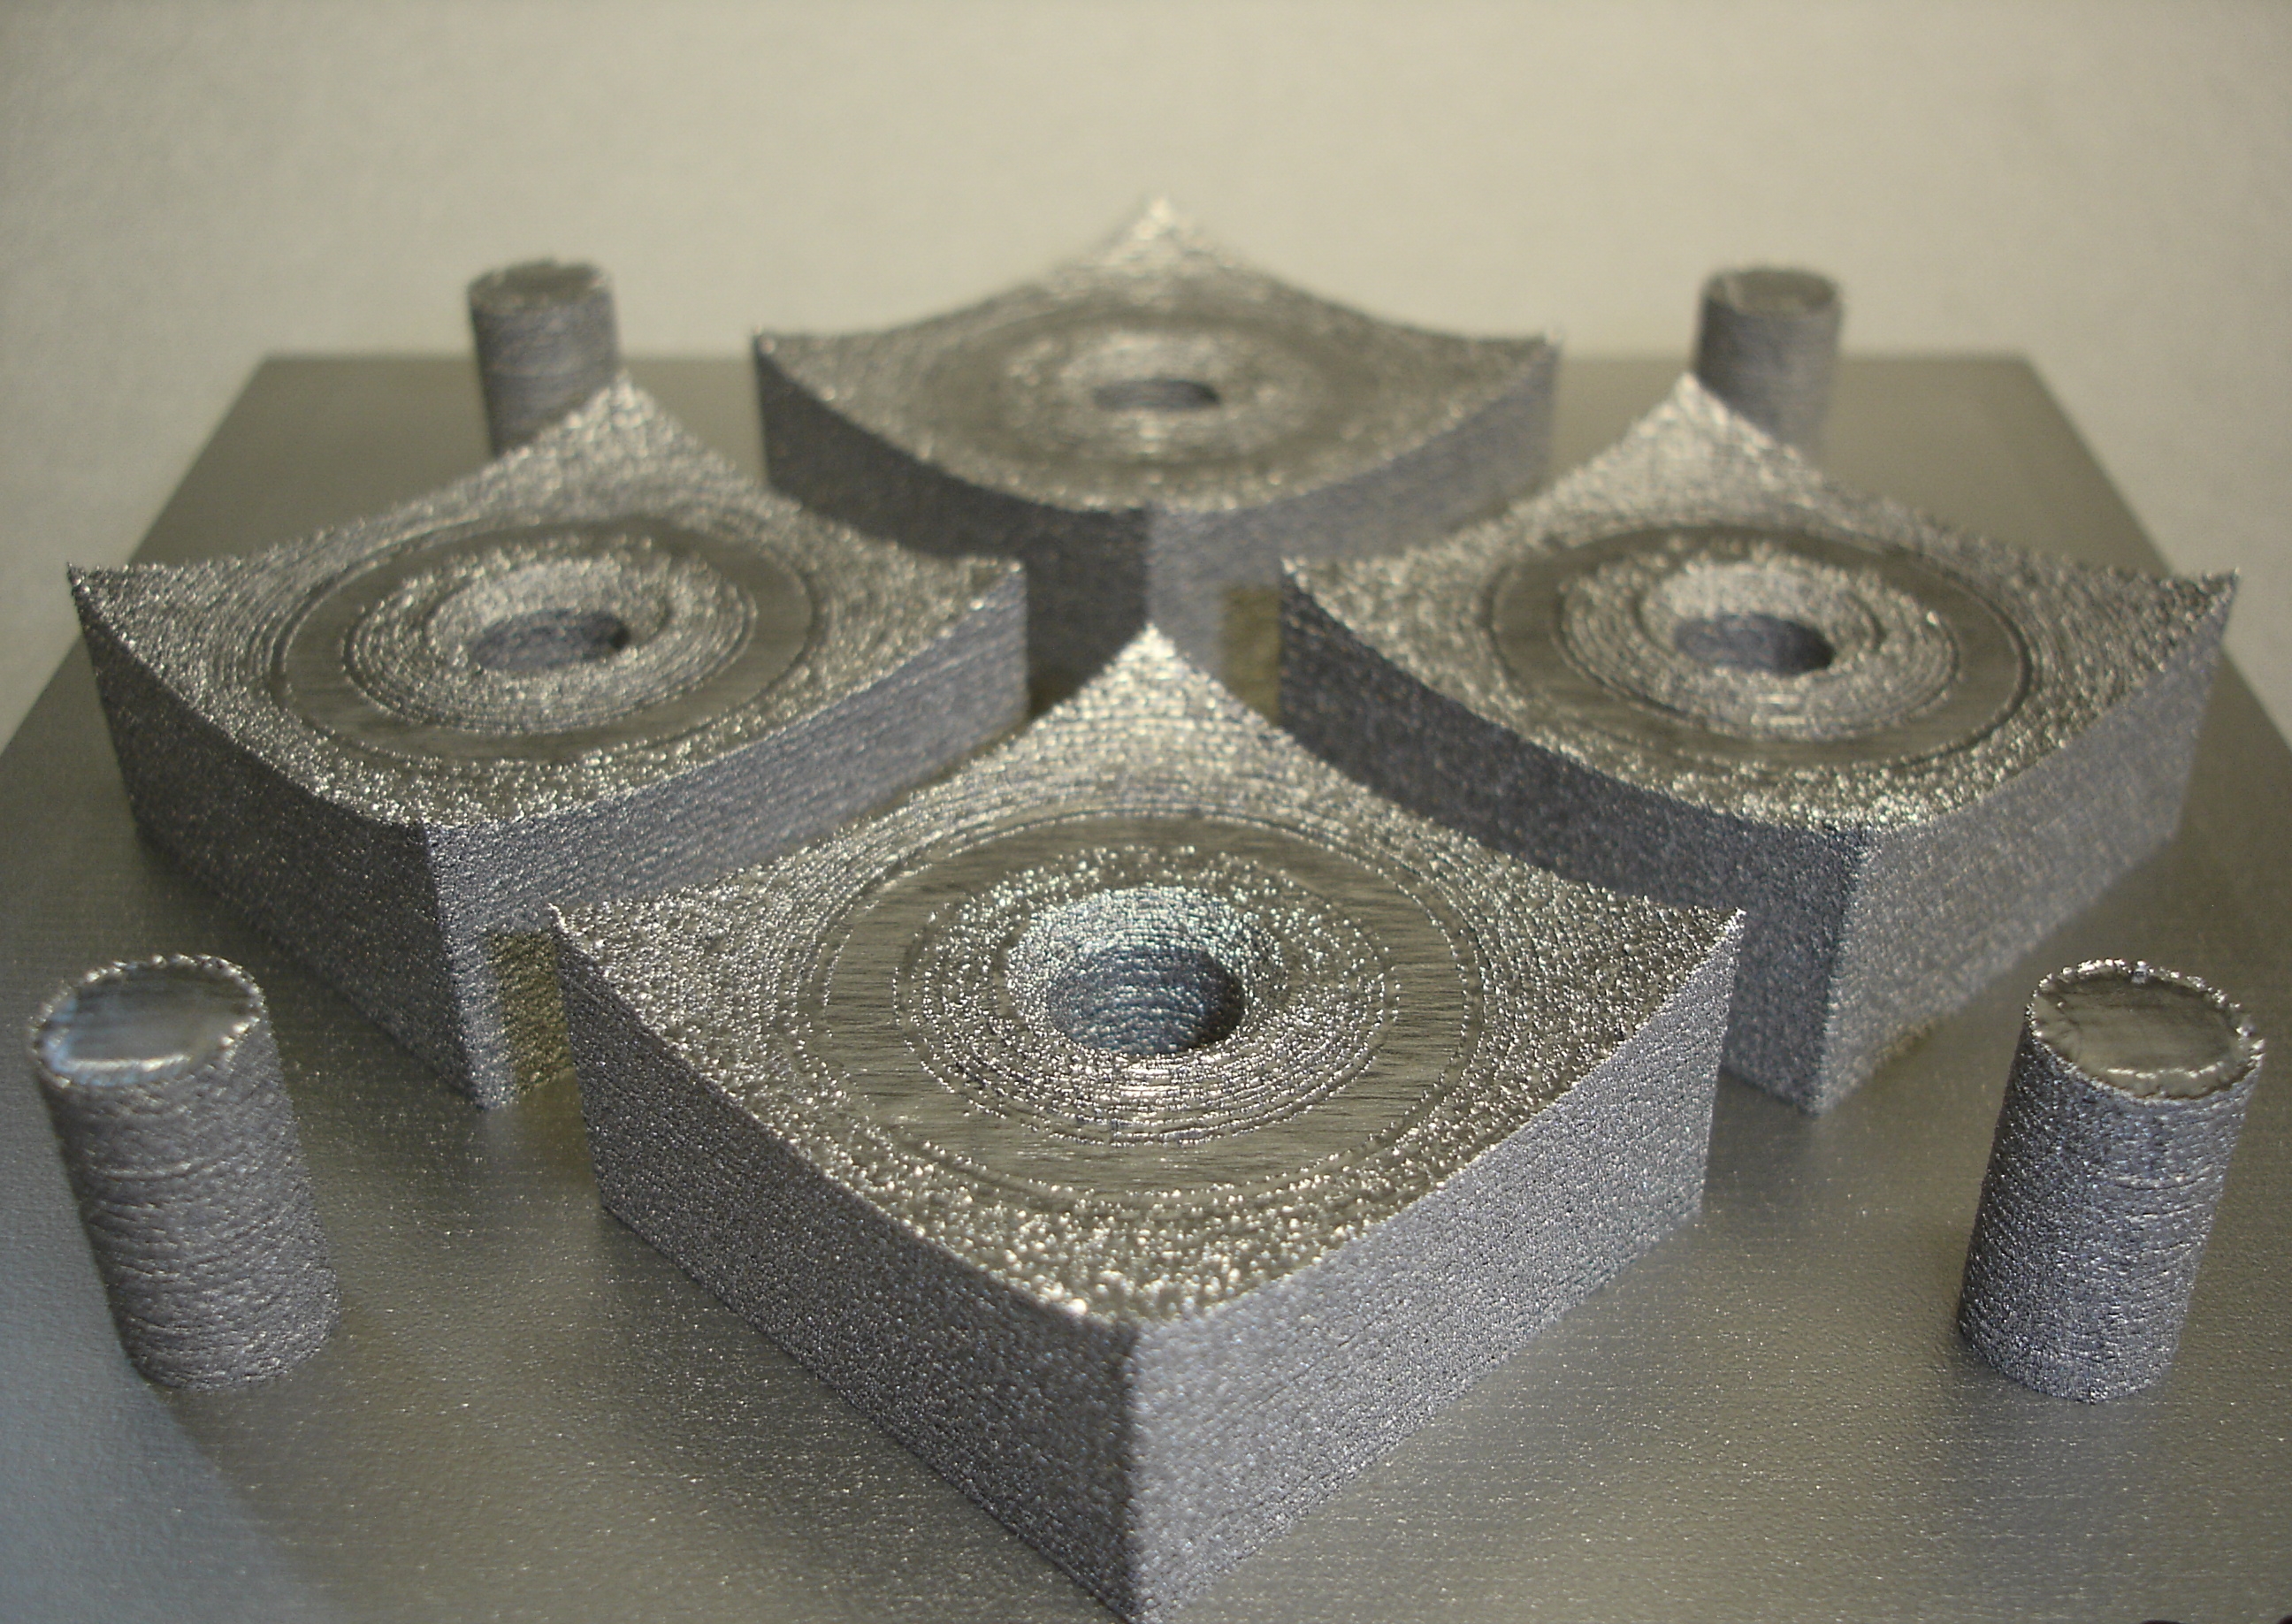 Cutting Crowns of FeCrV10 Material in Hybrid Design on Material 1.2343